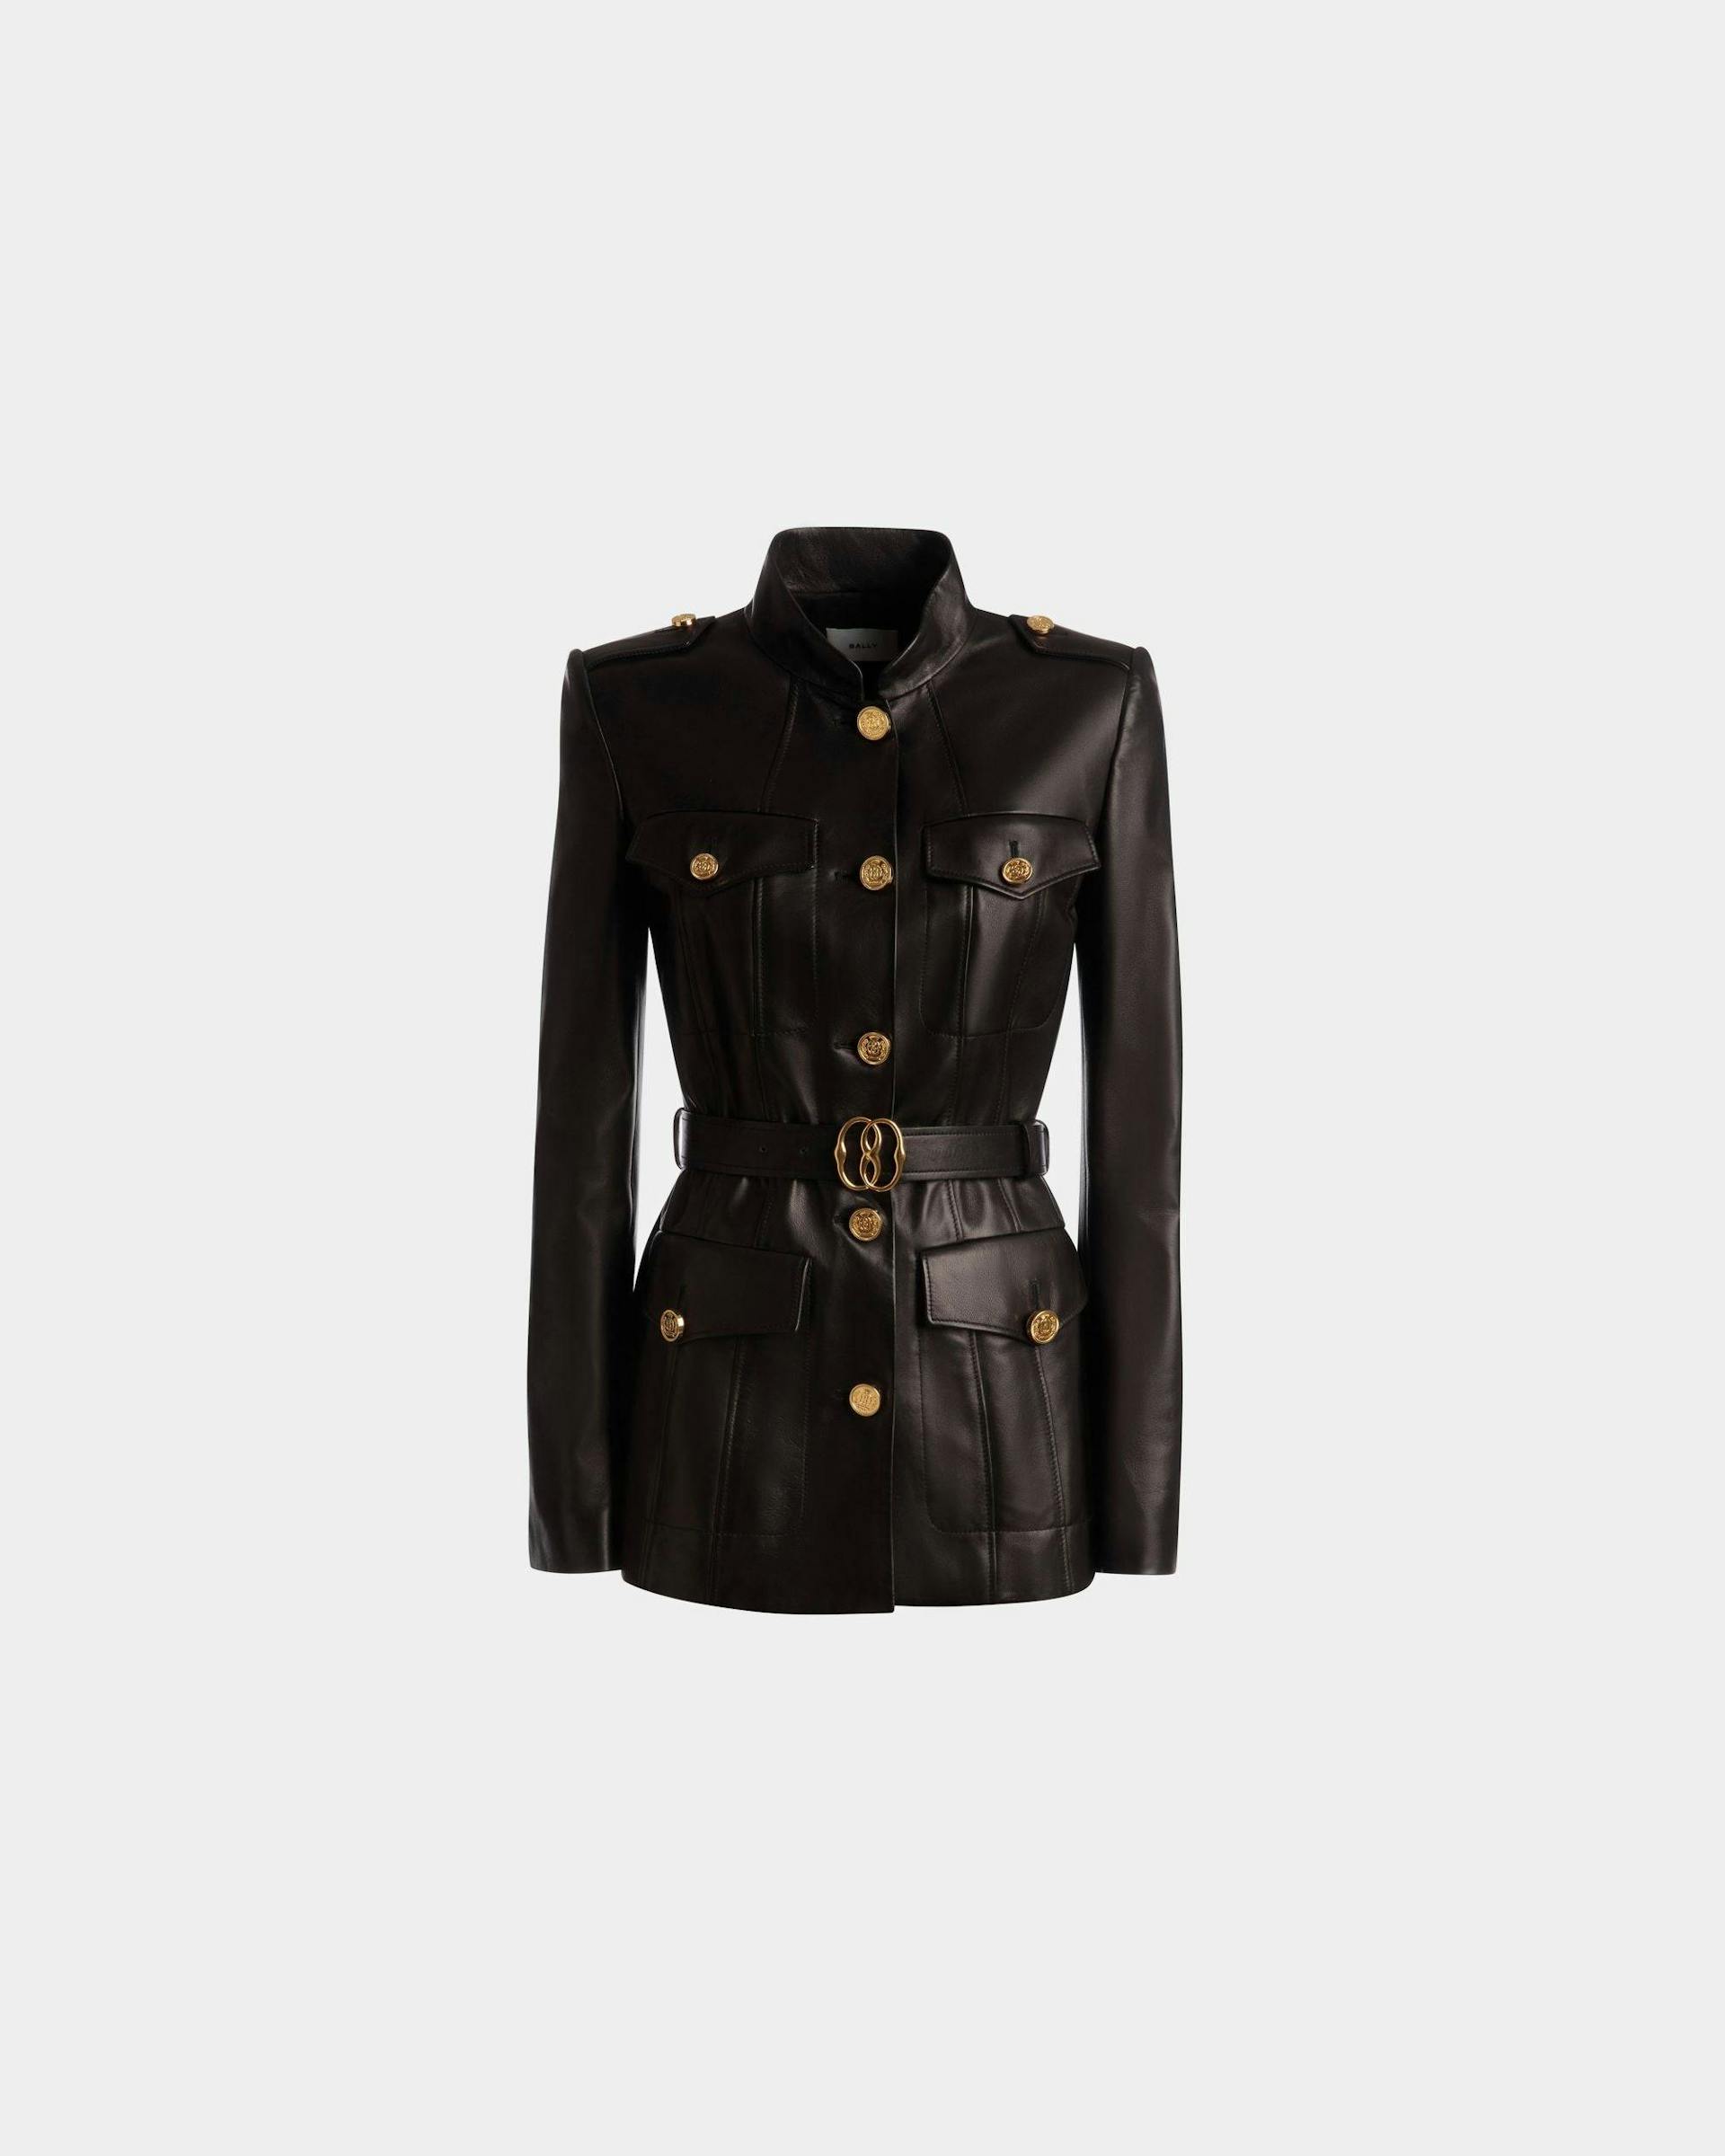 Women's Belted Jacket In Black Leather | Bally | Still Life Front